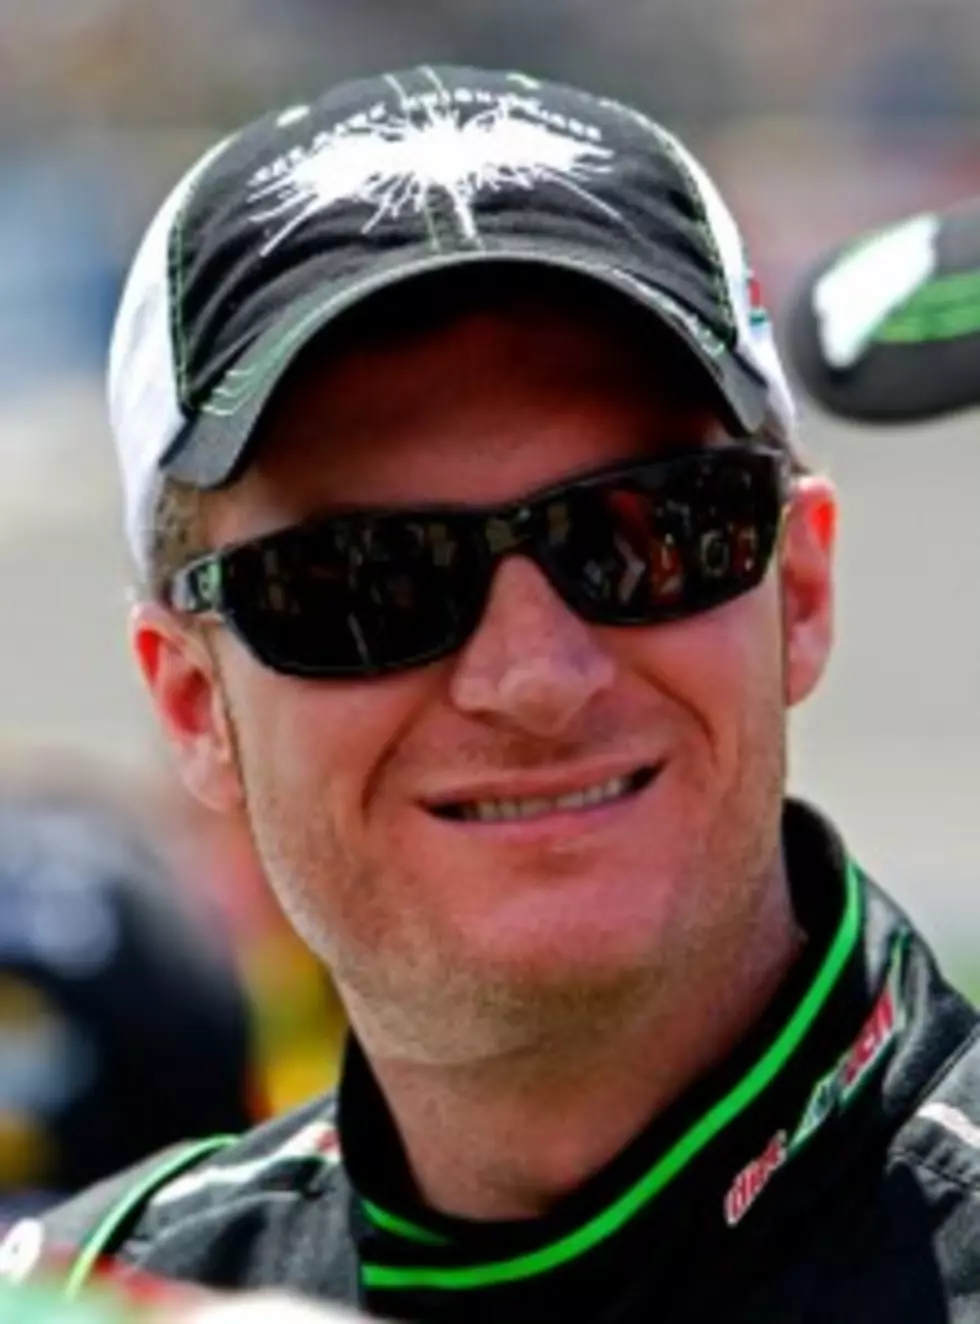 Dale Earnhardt Jr. has Created a Big Boost in NASCAR [NATIONAL STANDINGS]